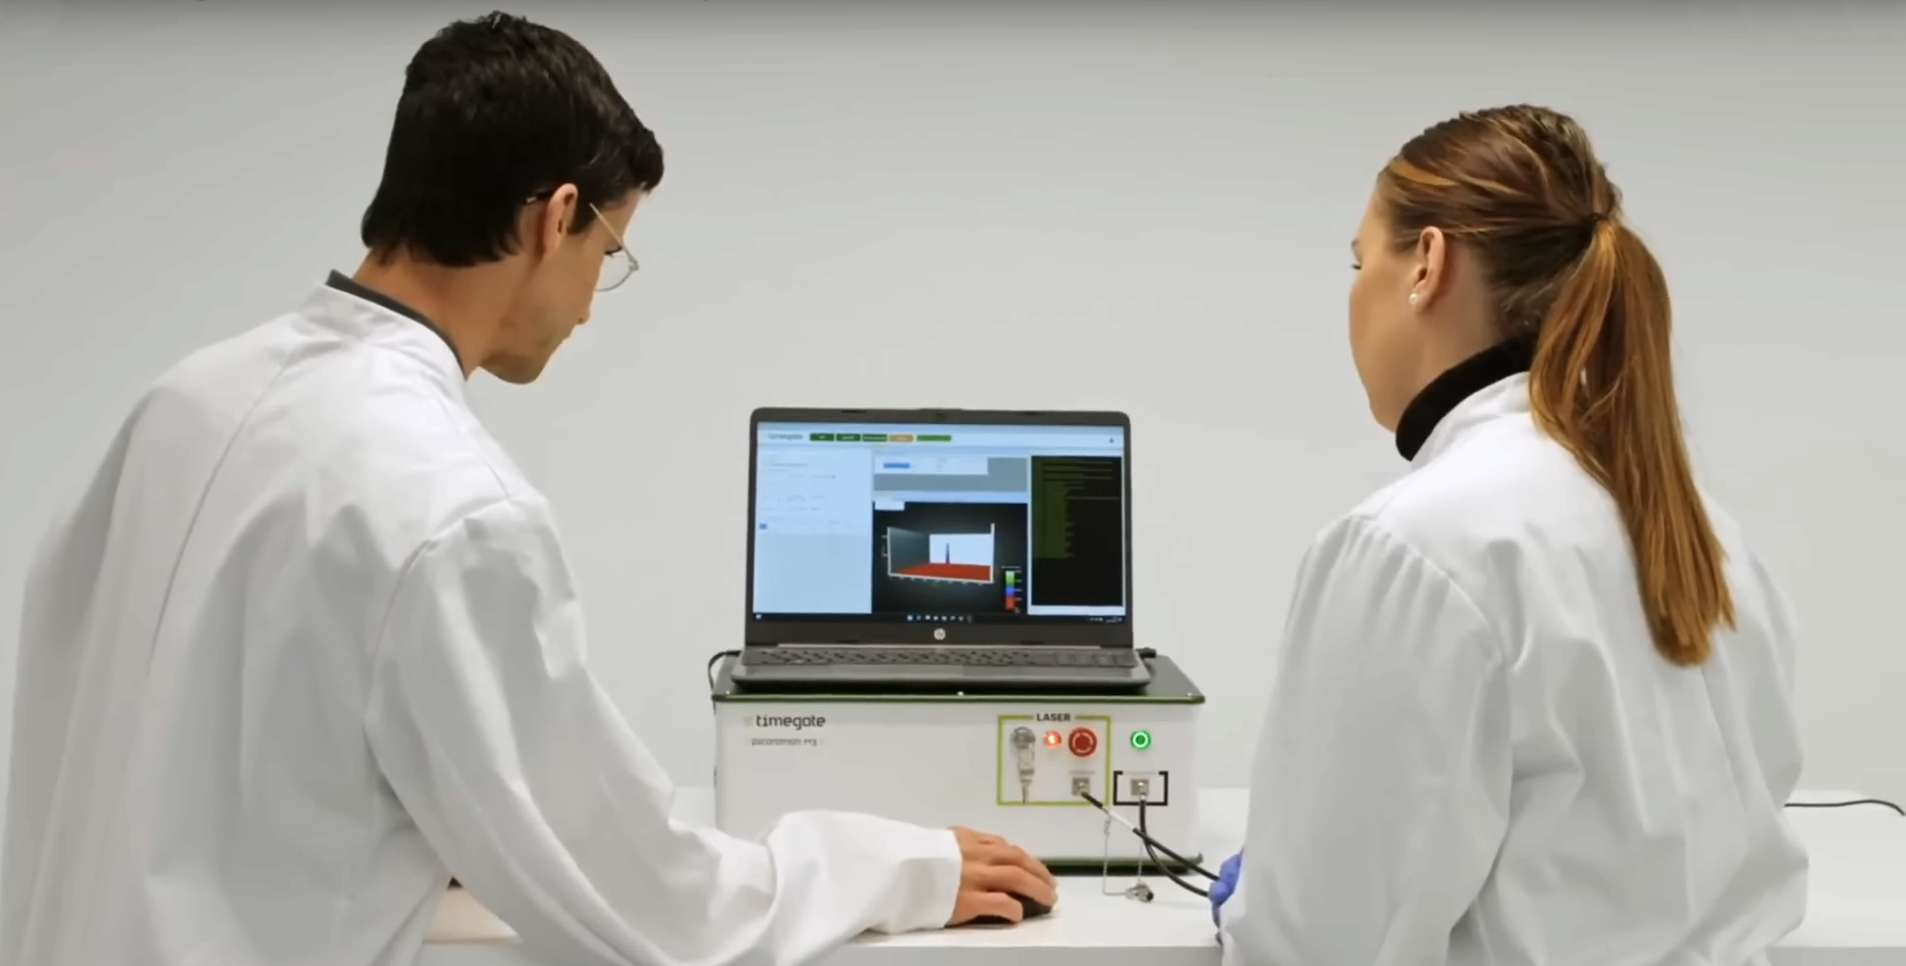 two-scientists-measuring-with-picoramanm3-spectrometer